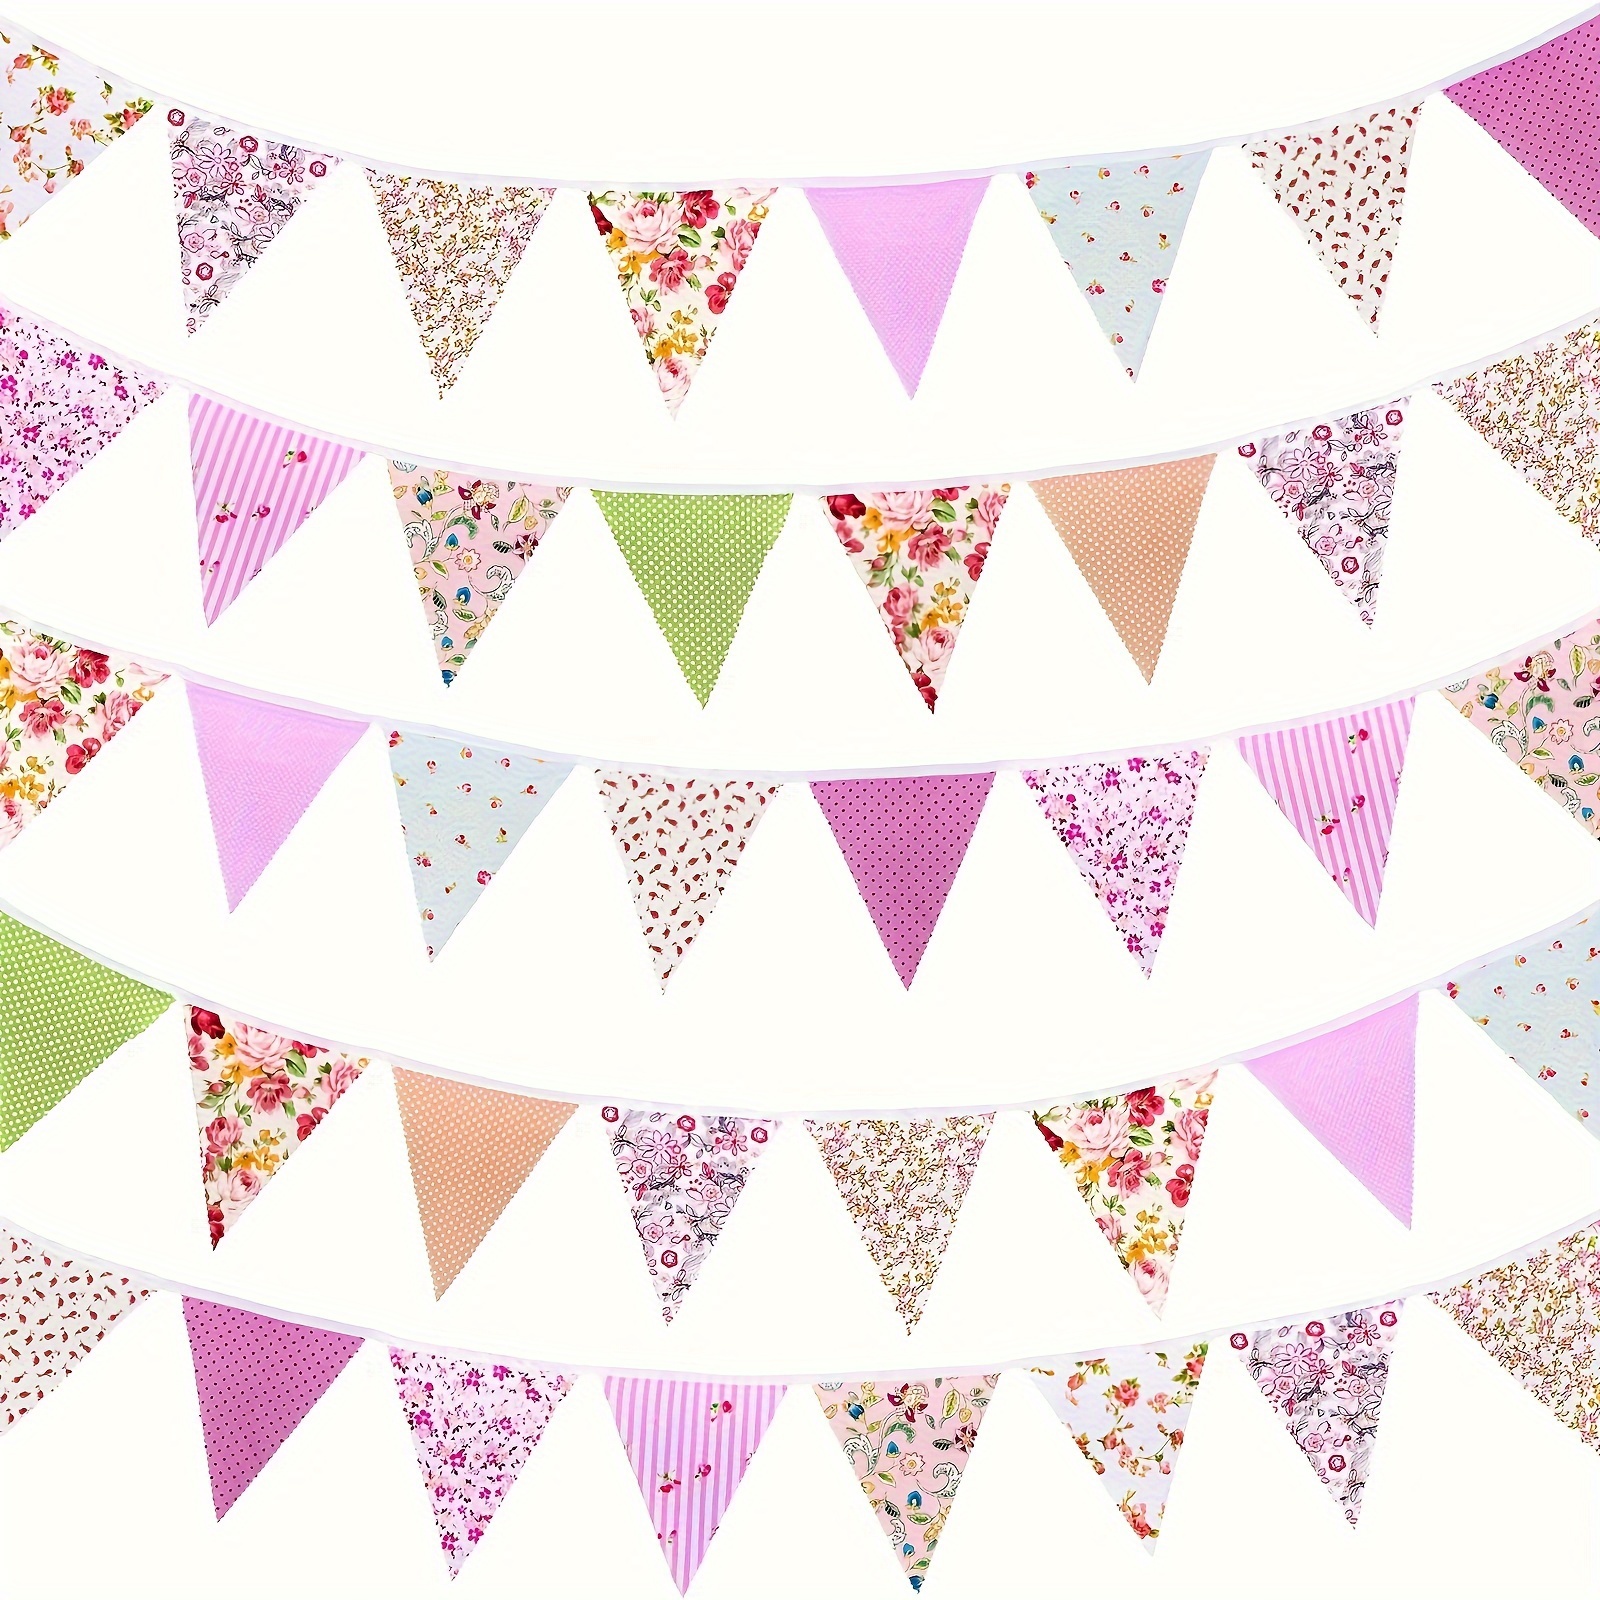 

40ft Fabric Bunting Banner Floral Vintage Reusable Cotton Triangle Flag Garland Decoration With 42pcs For Garden Wedding Baby Shower Birthday Parties